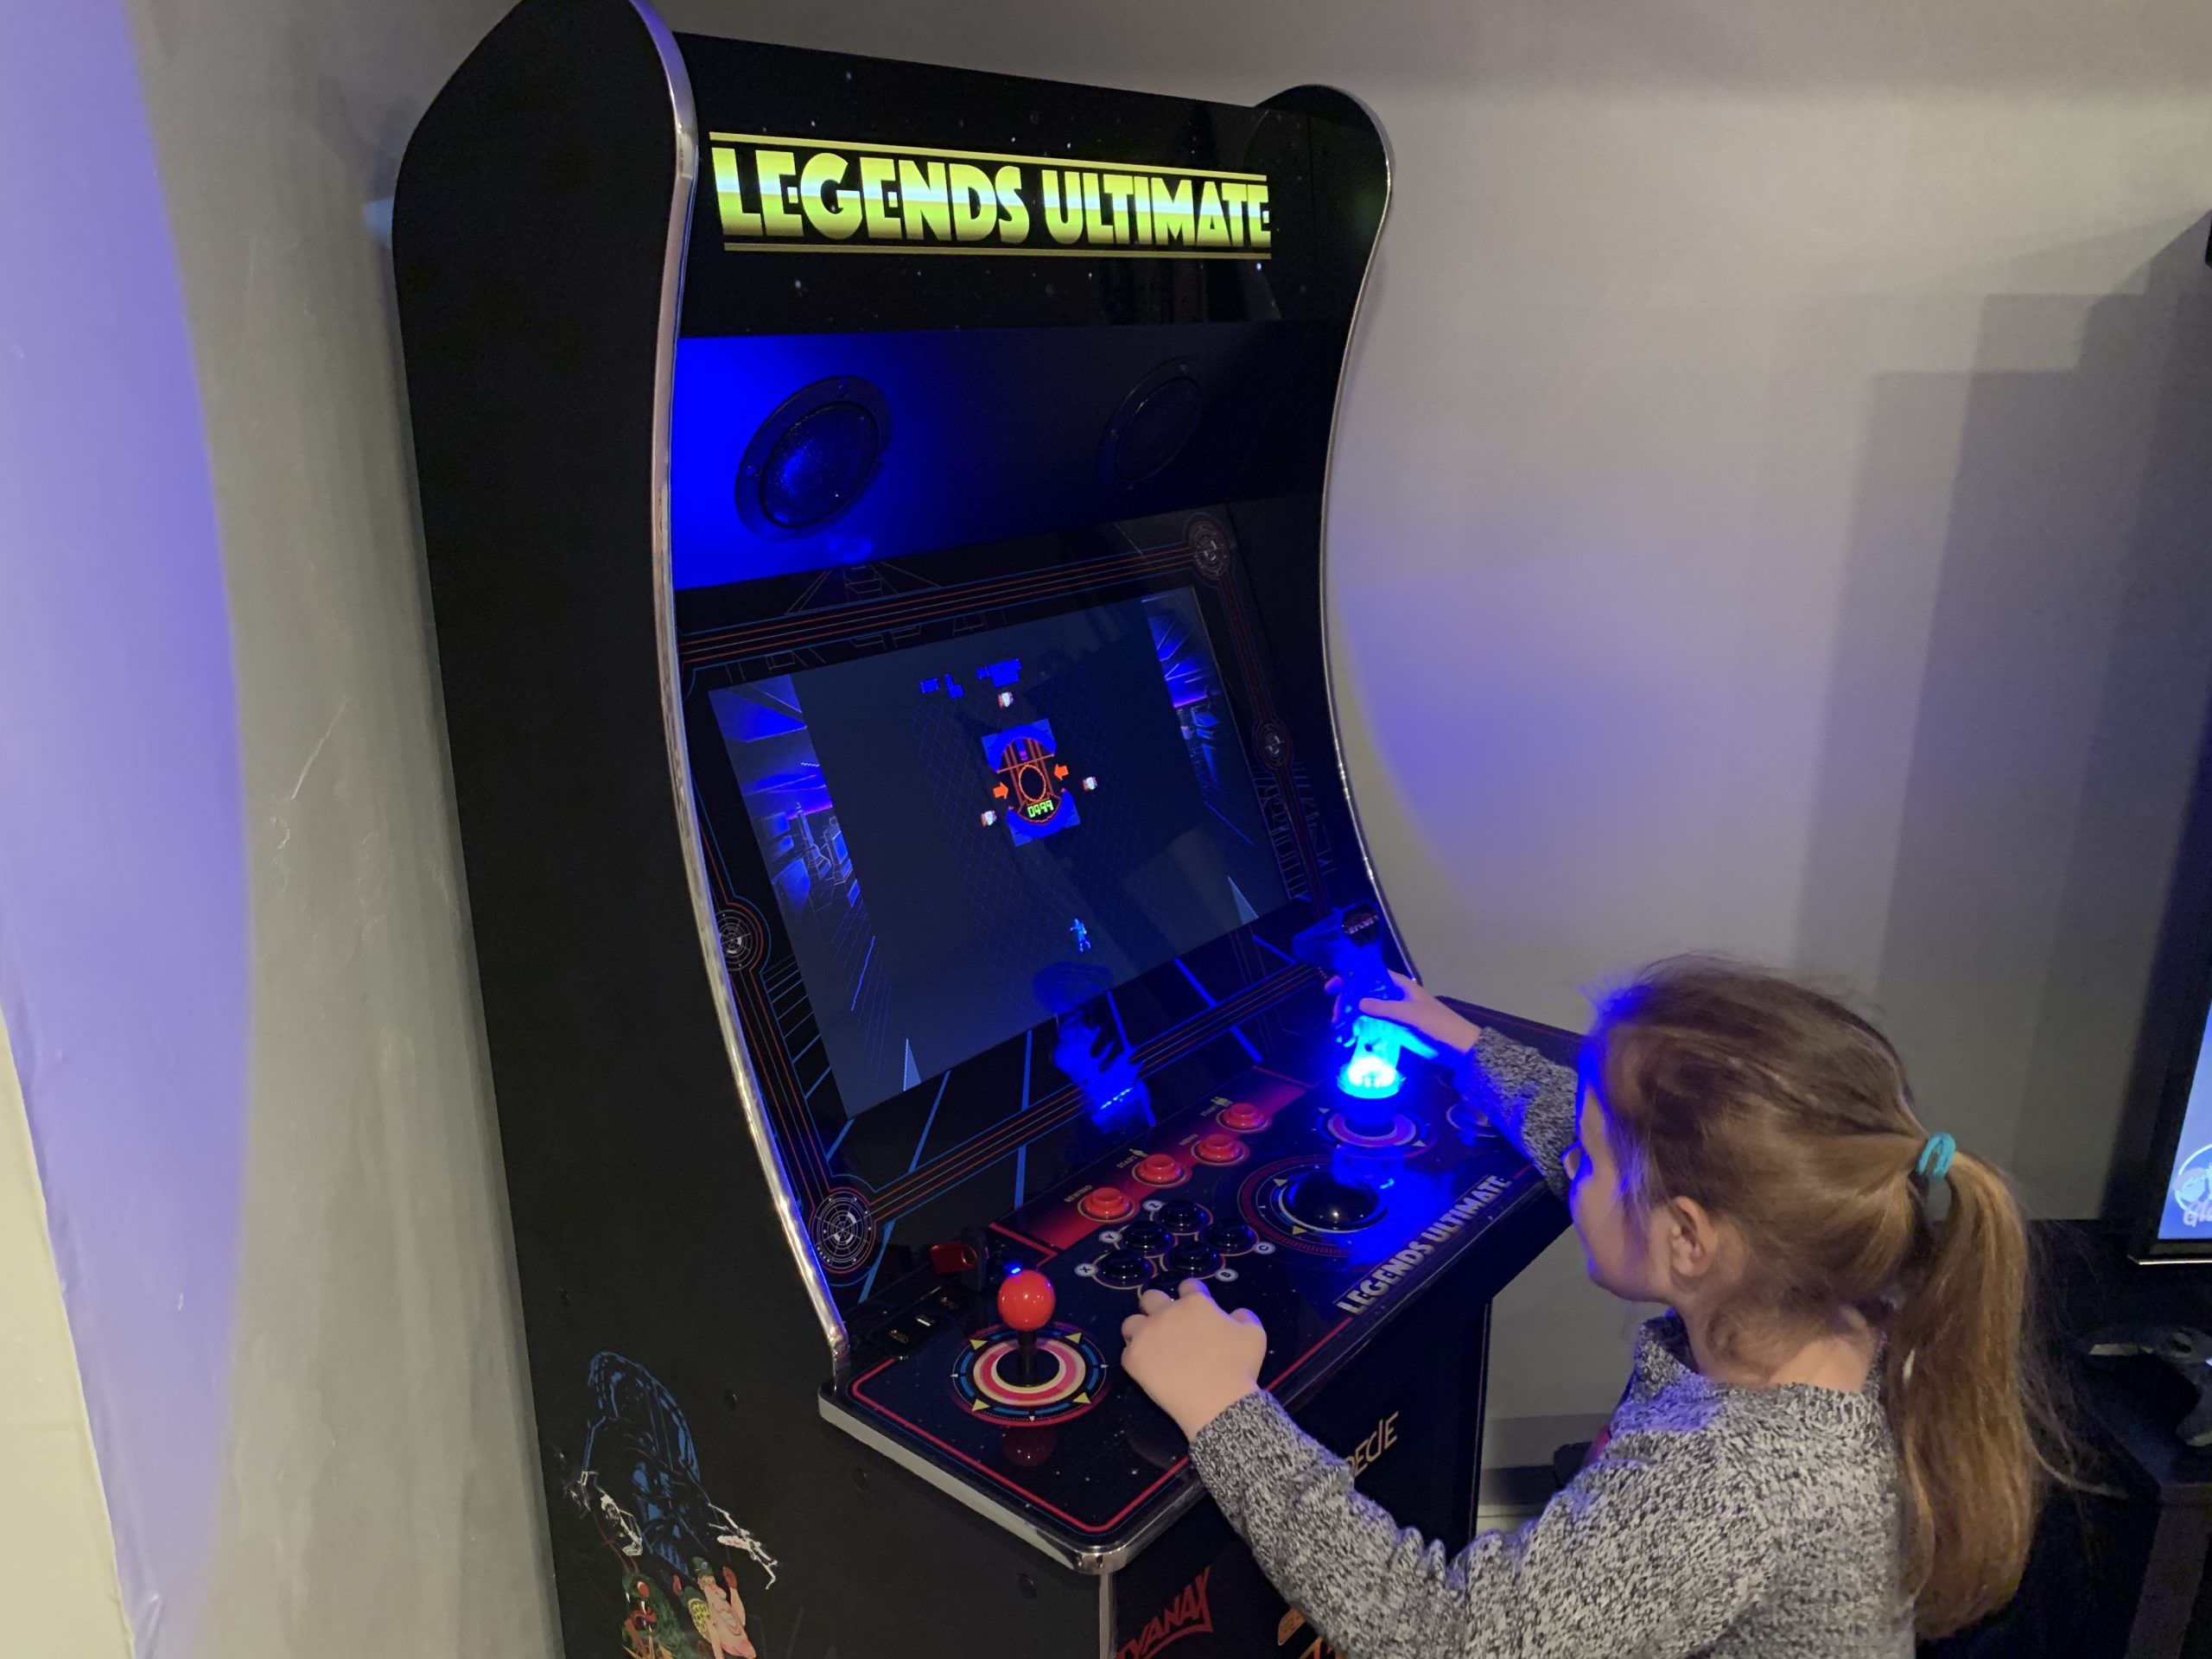 Installing The Grs Tron Arcade Flight Stick In The Atgames Legends